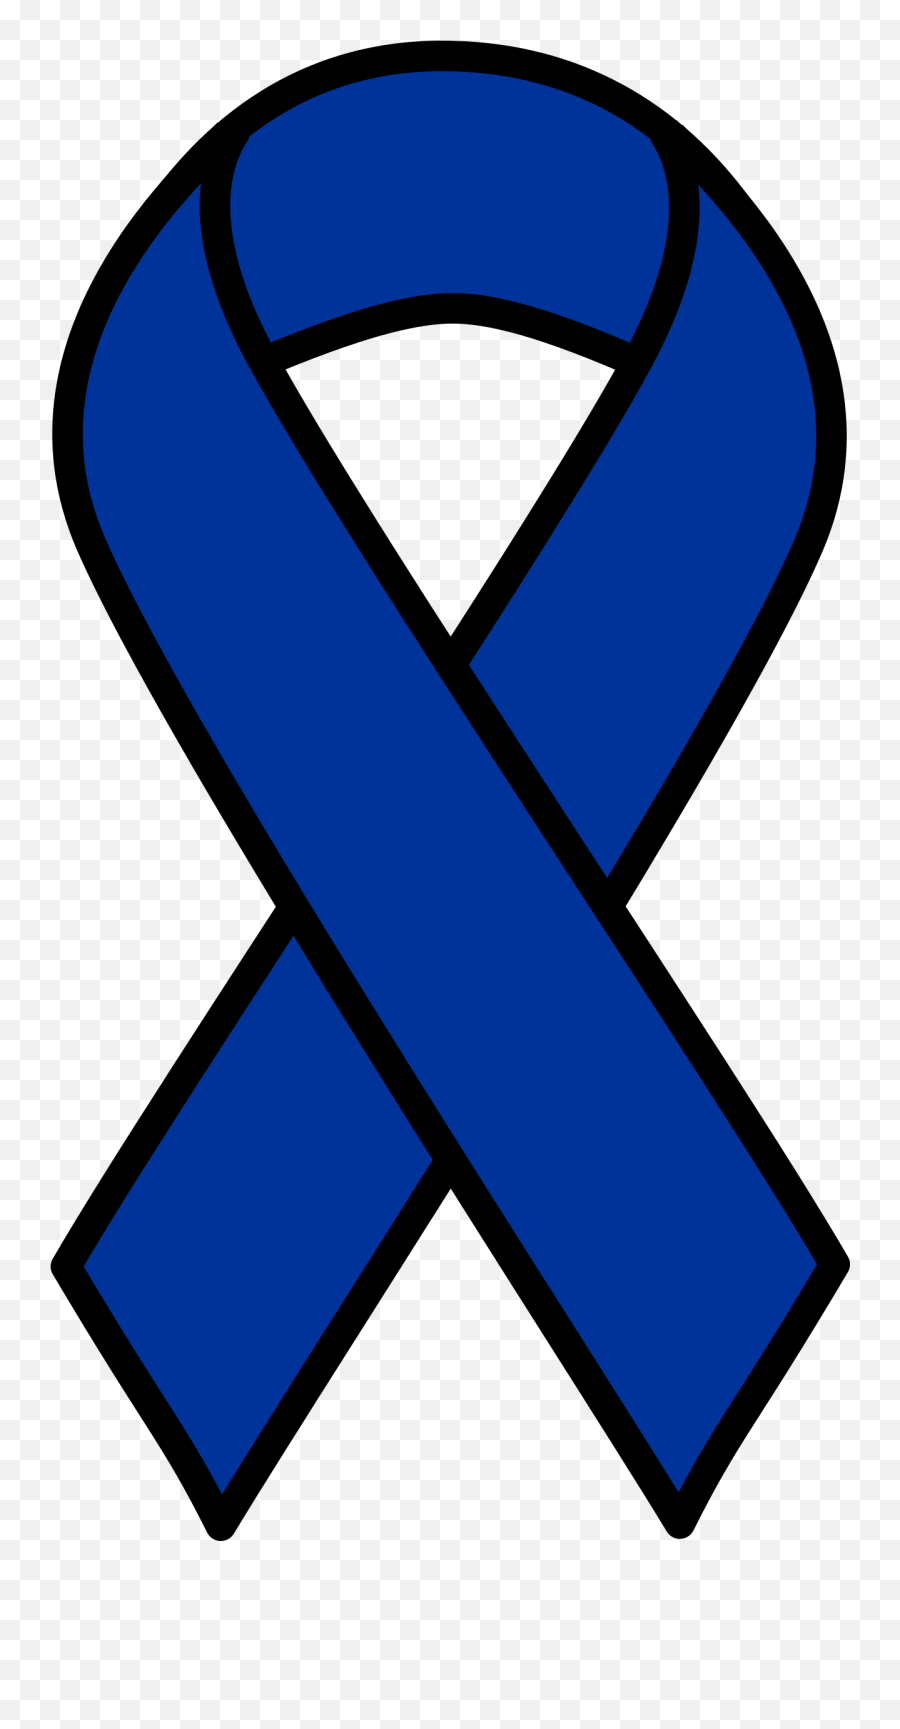 Download Hd 28 Collection Of Blue Ribbon Clipart Black And - Blue Colon Cancer Ribbon Png,Blue Ribbon Transparent